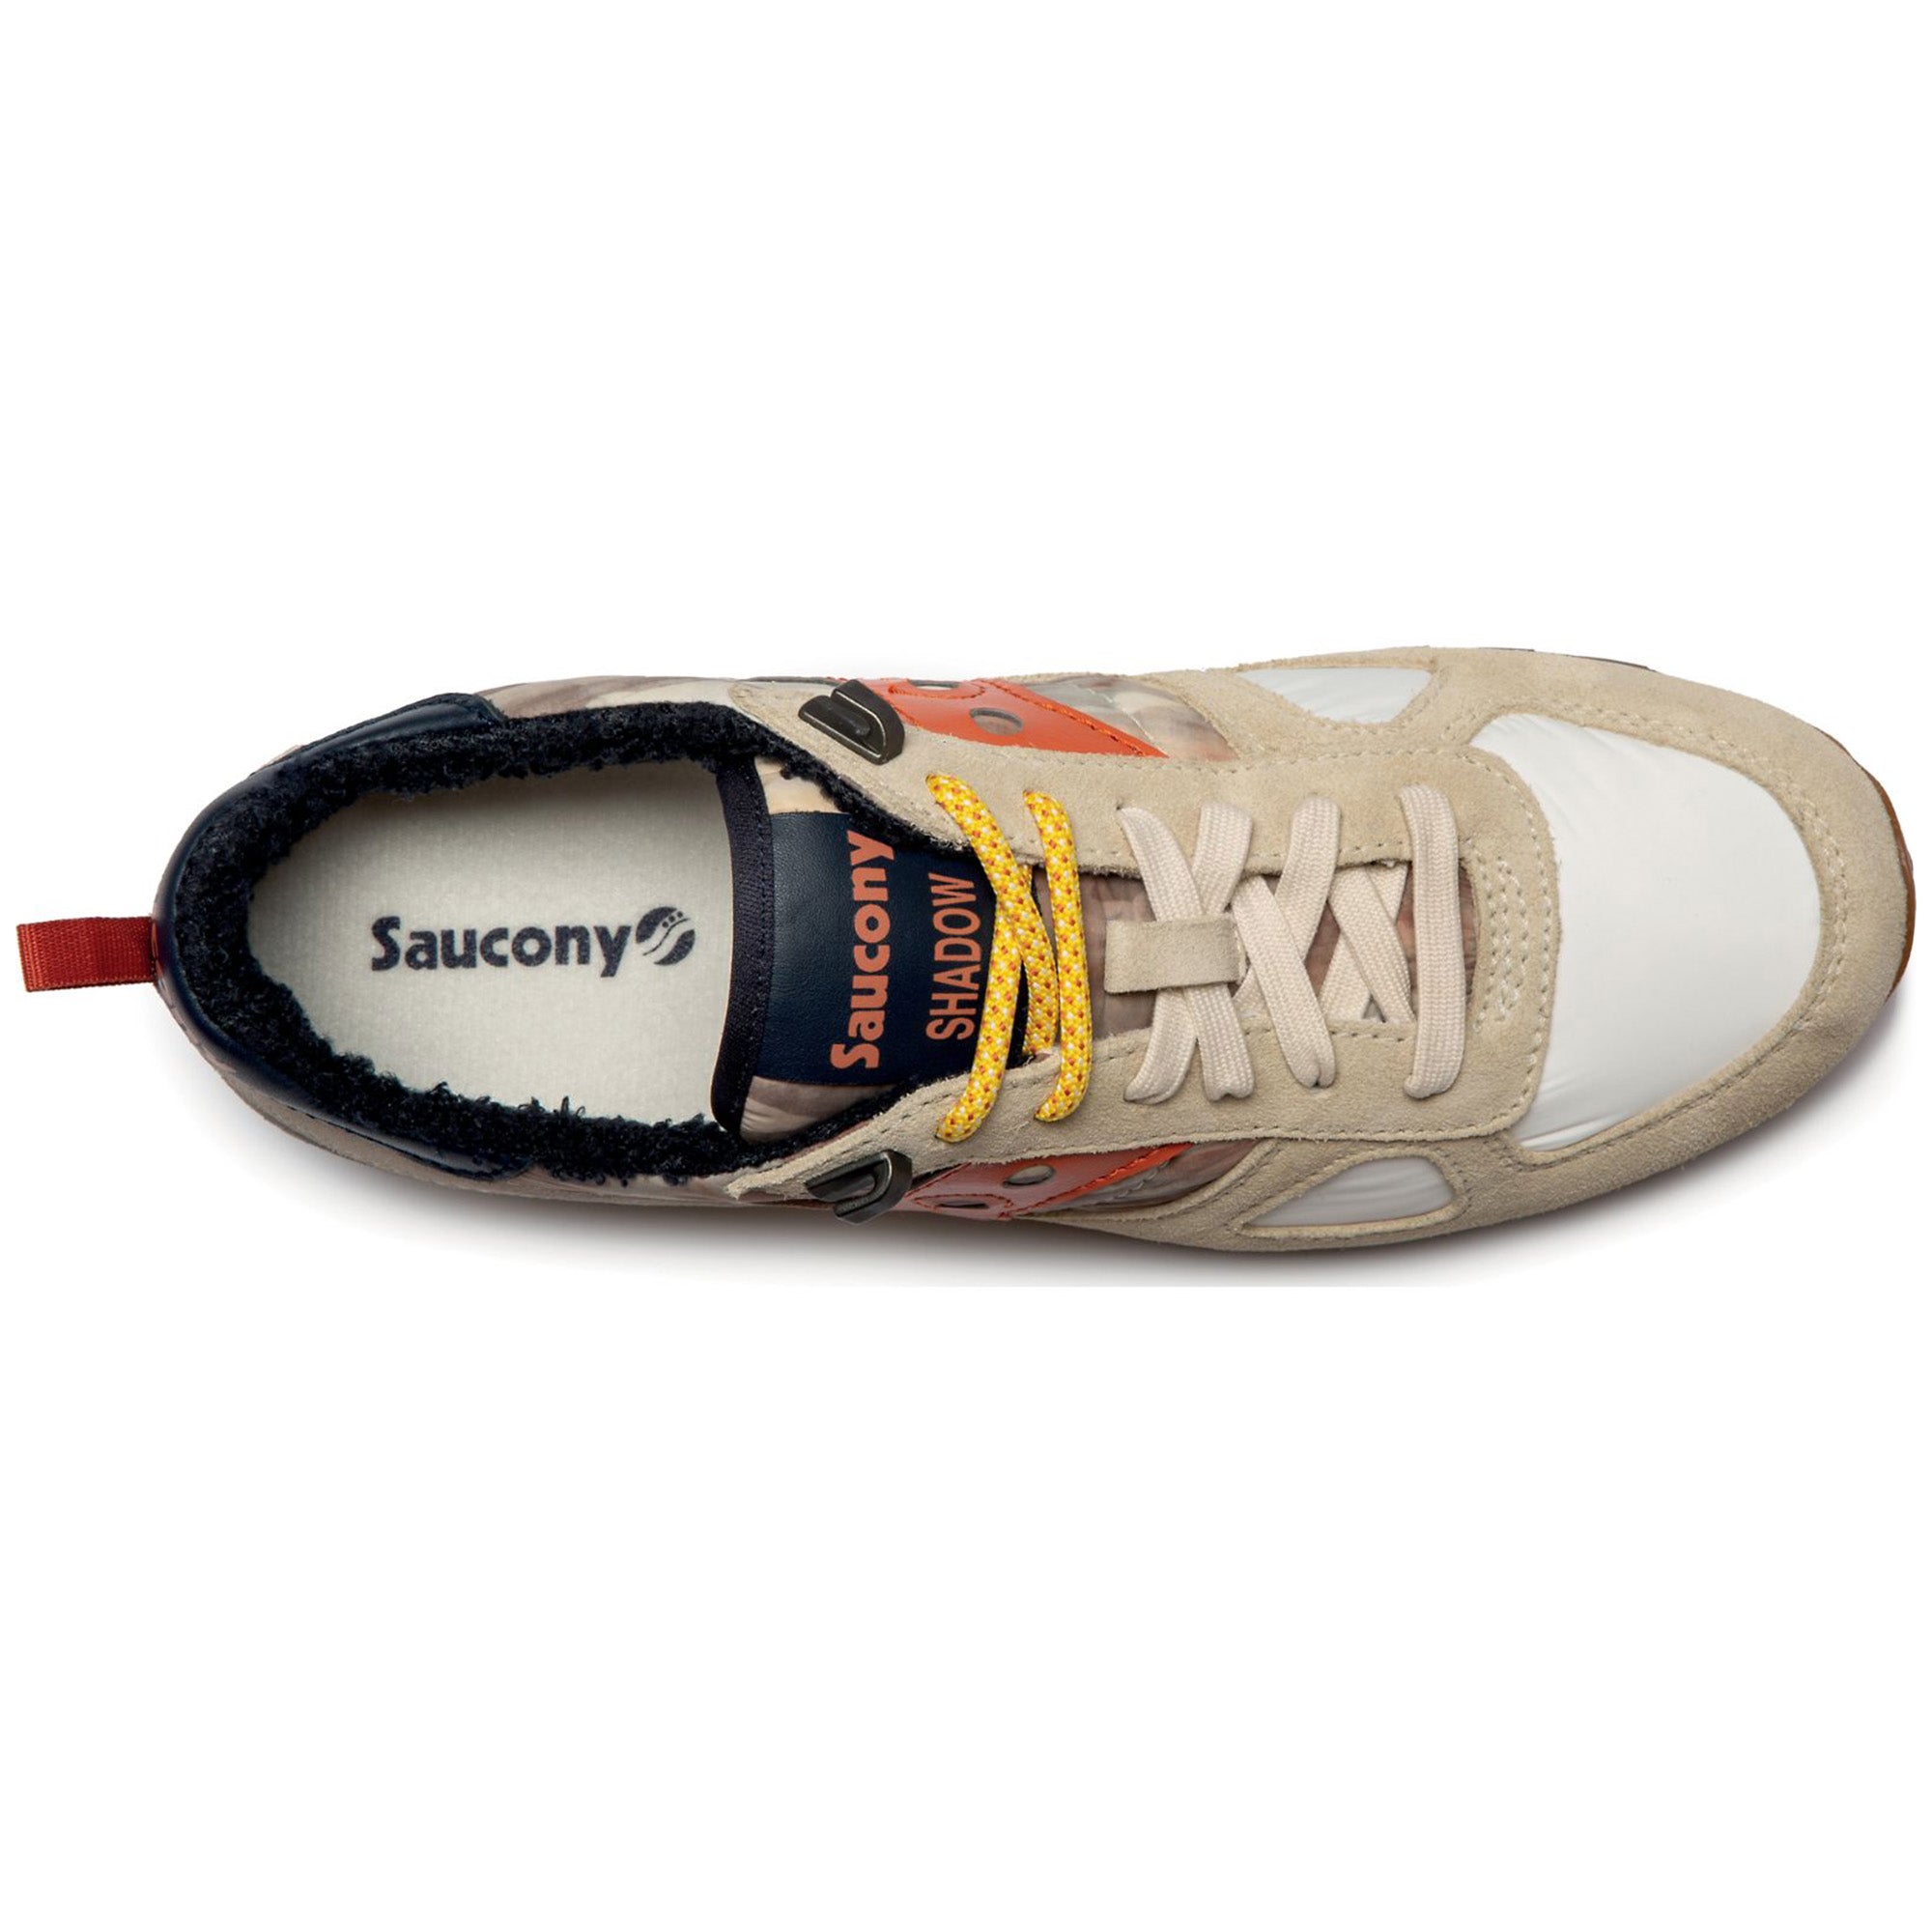 Saucony Shadow Original 'Retro Mountain Pack' Trainers - White/Navy/Red